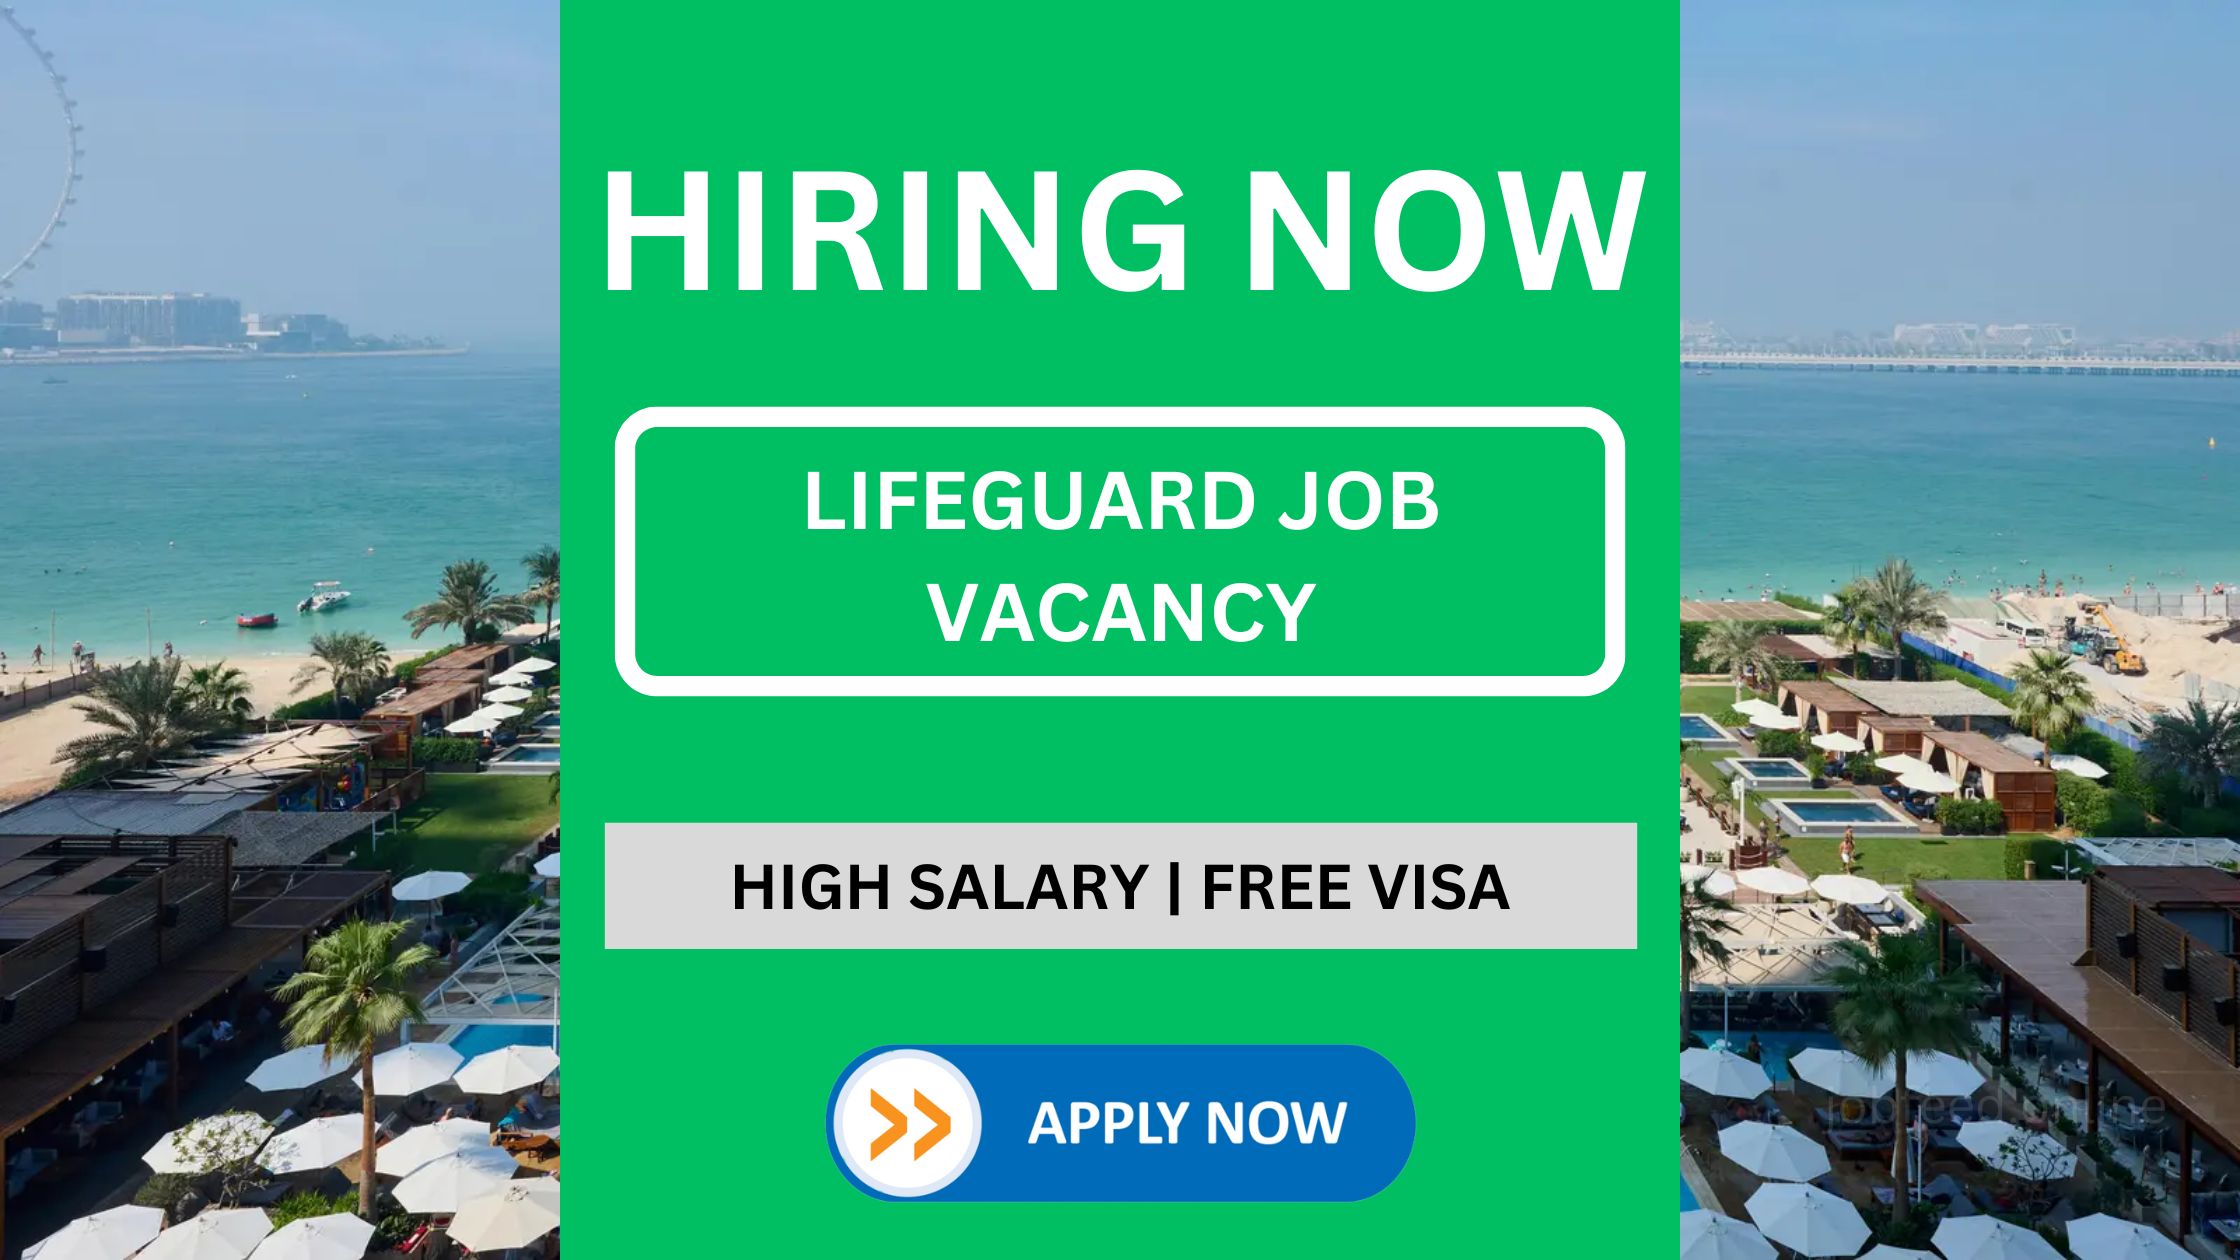 Lifeguard Job Vacancy with Attractive Salary - Check benefits and apply online